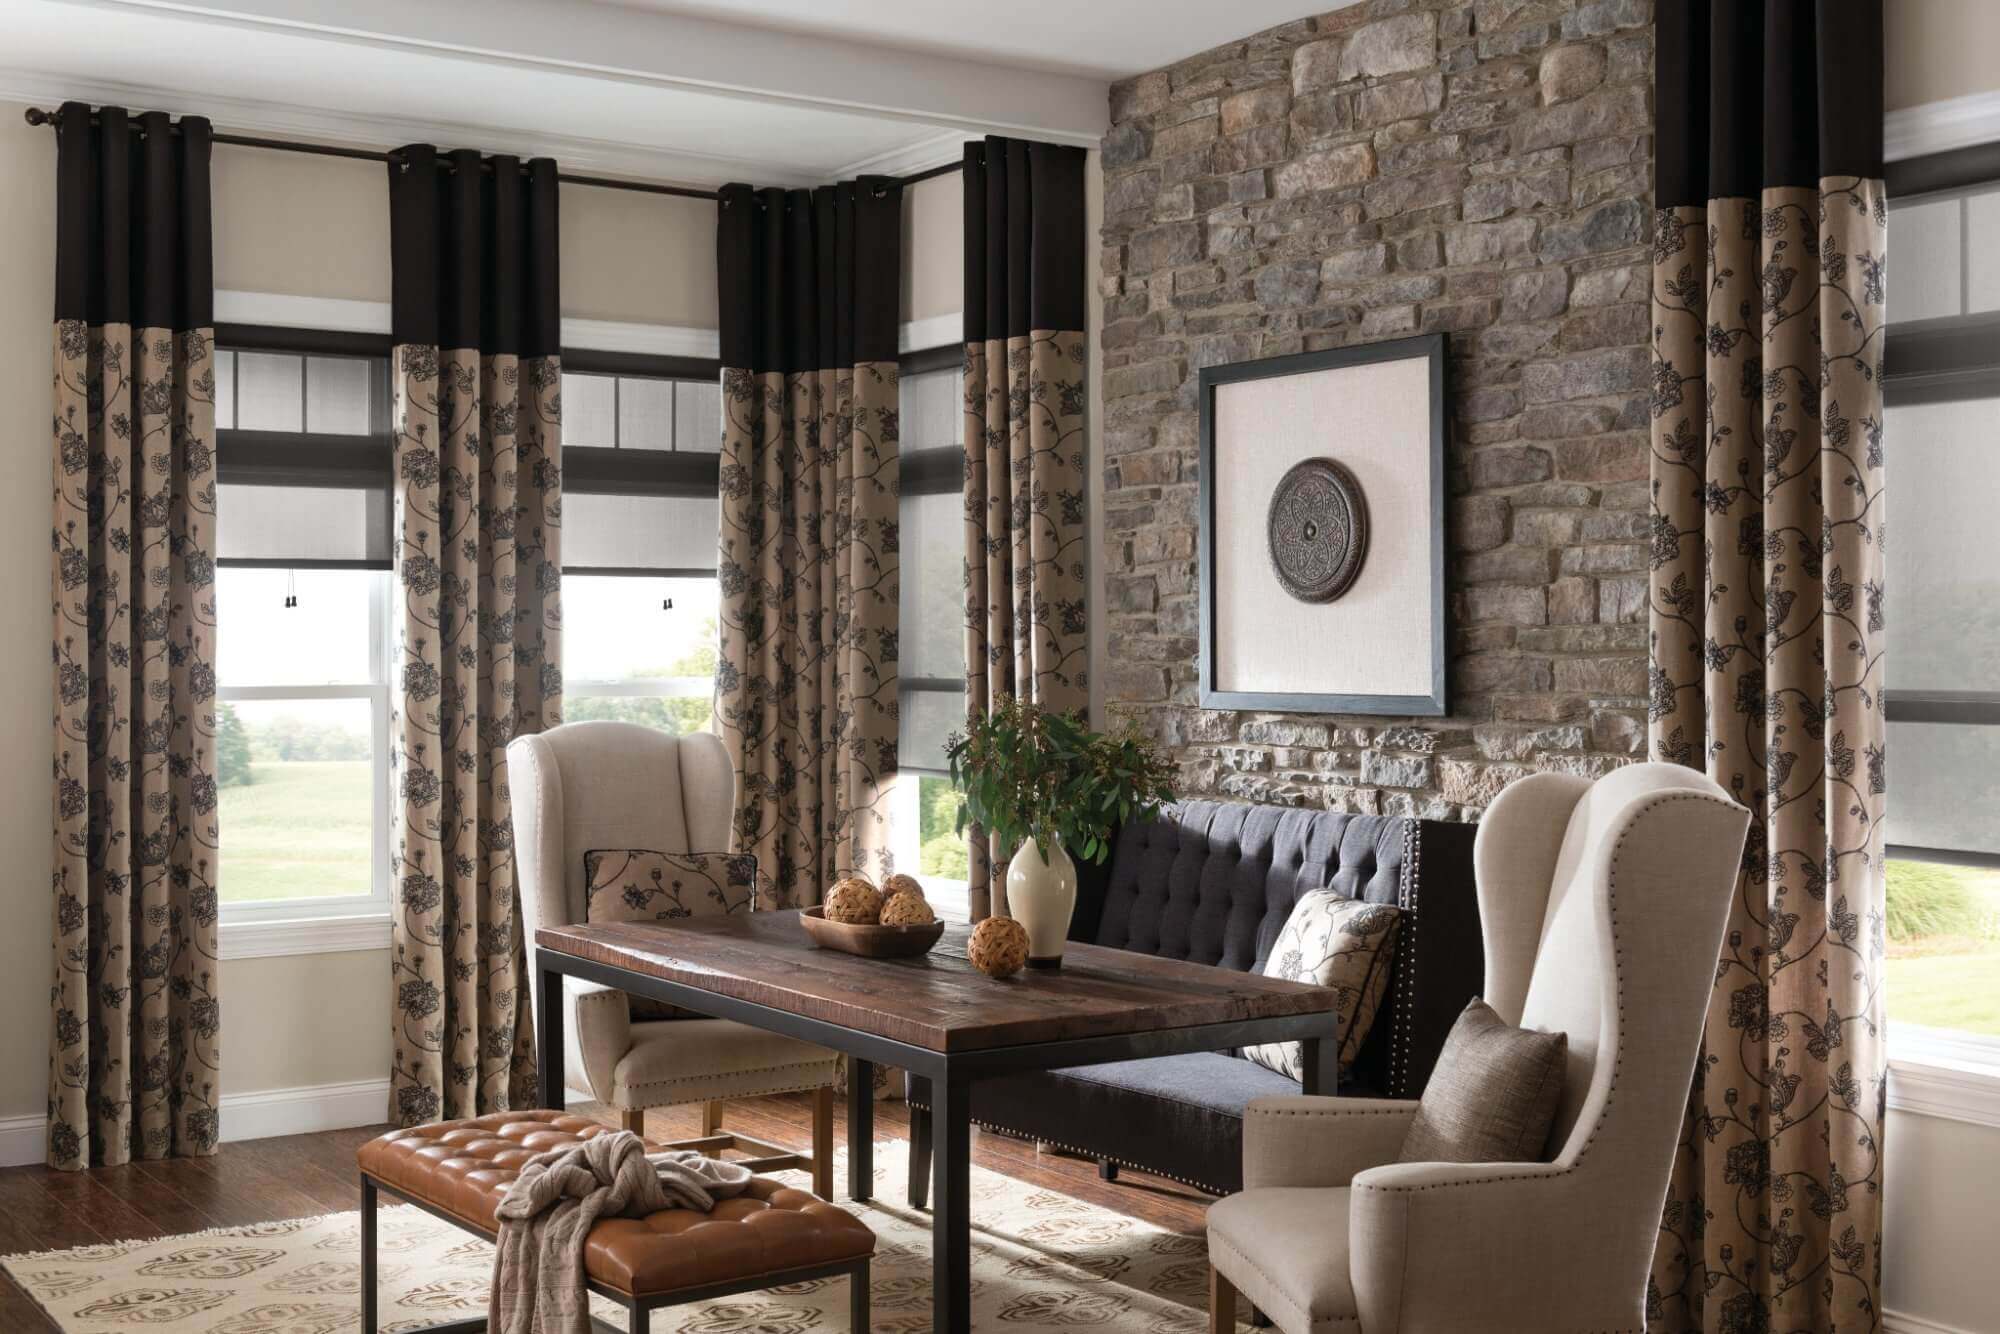 Living Room Window Treatments With Beads